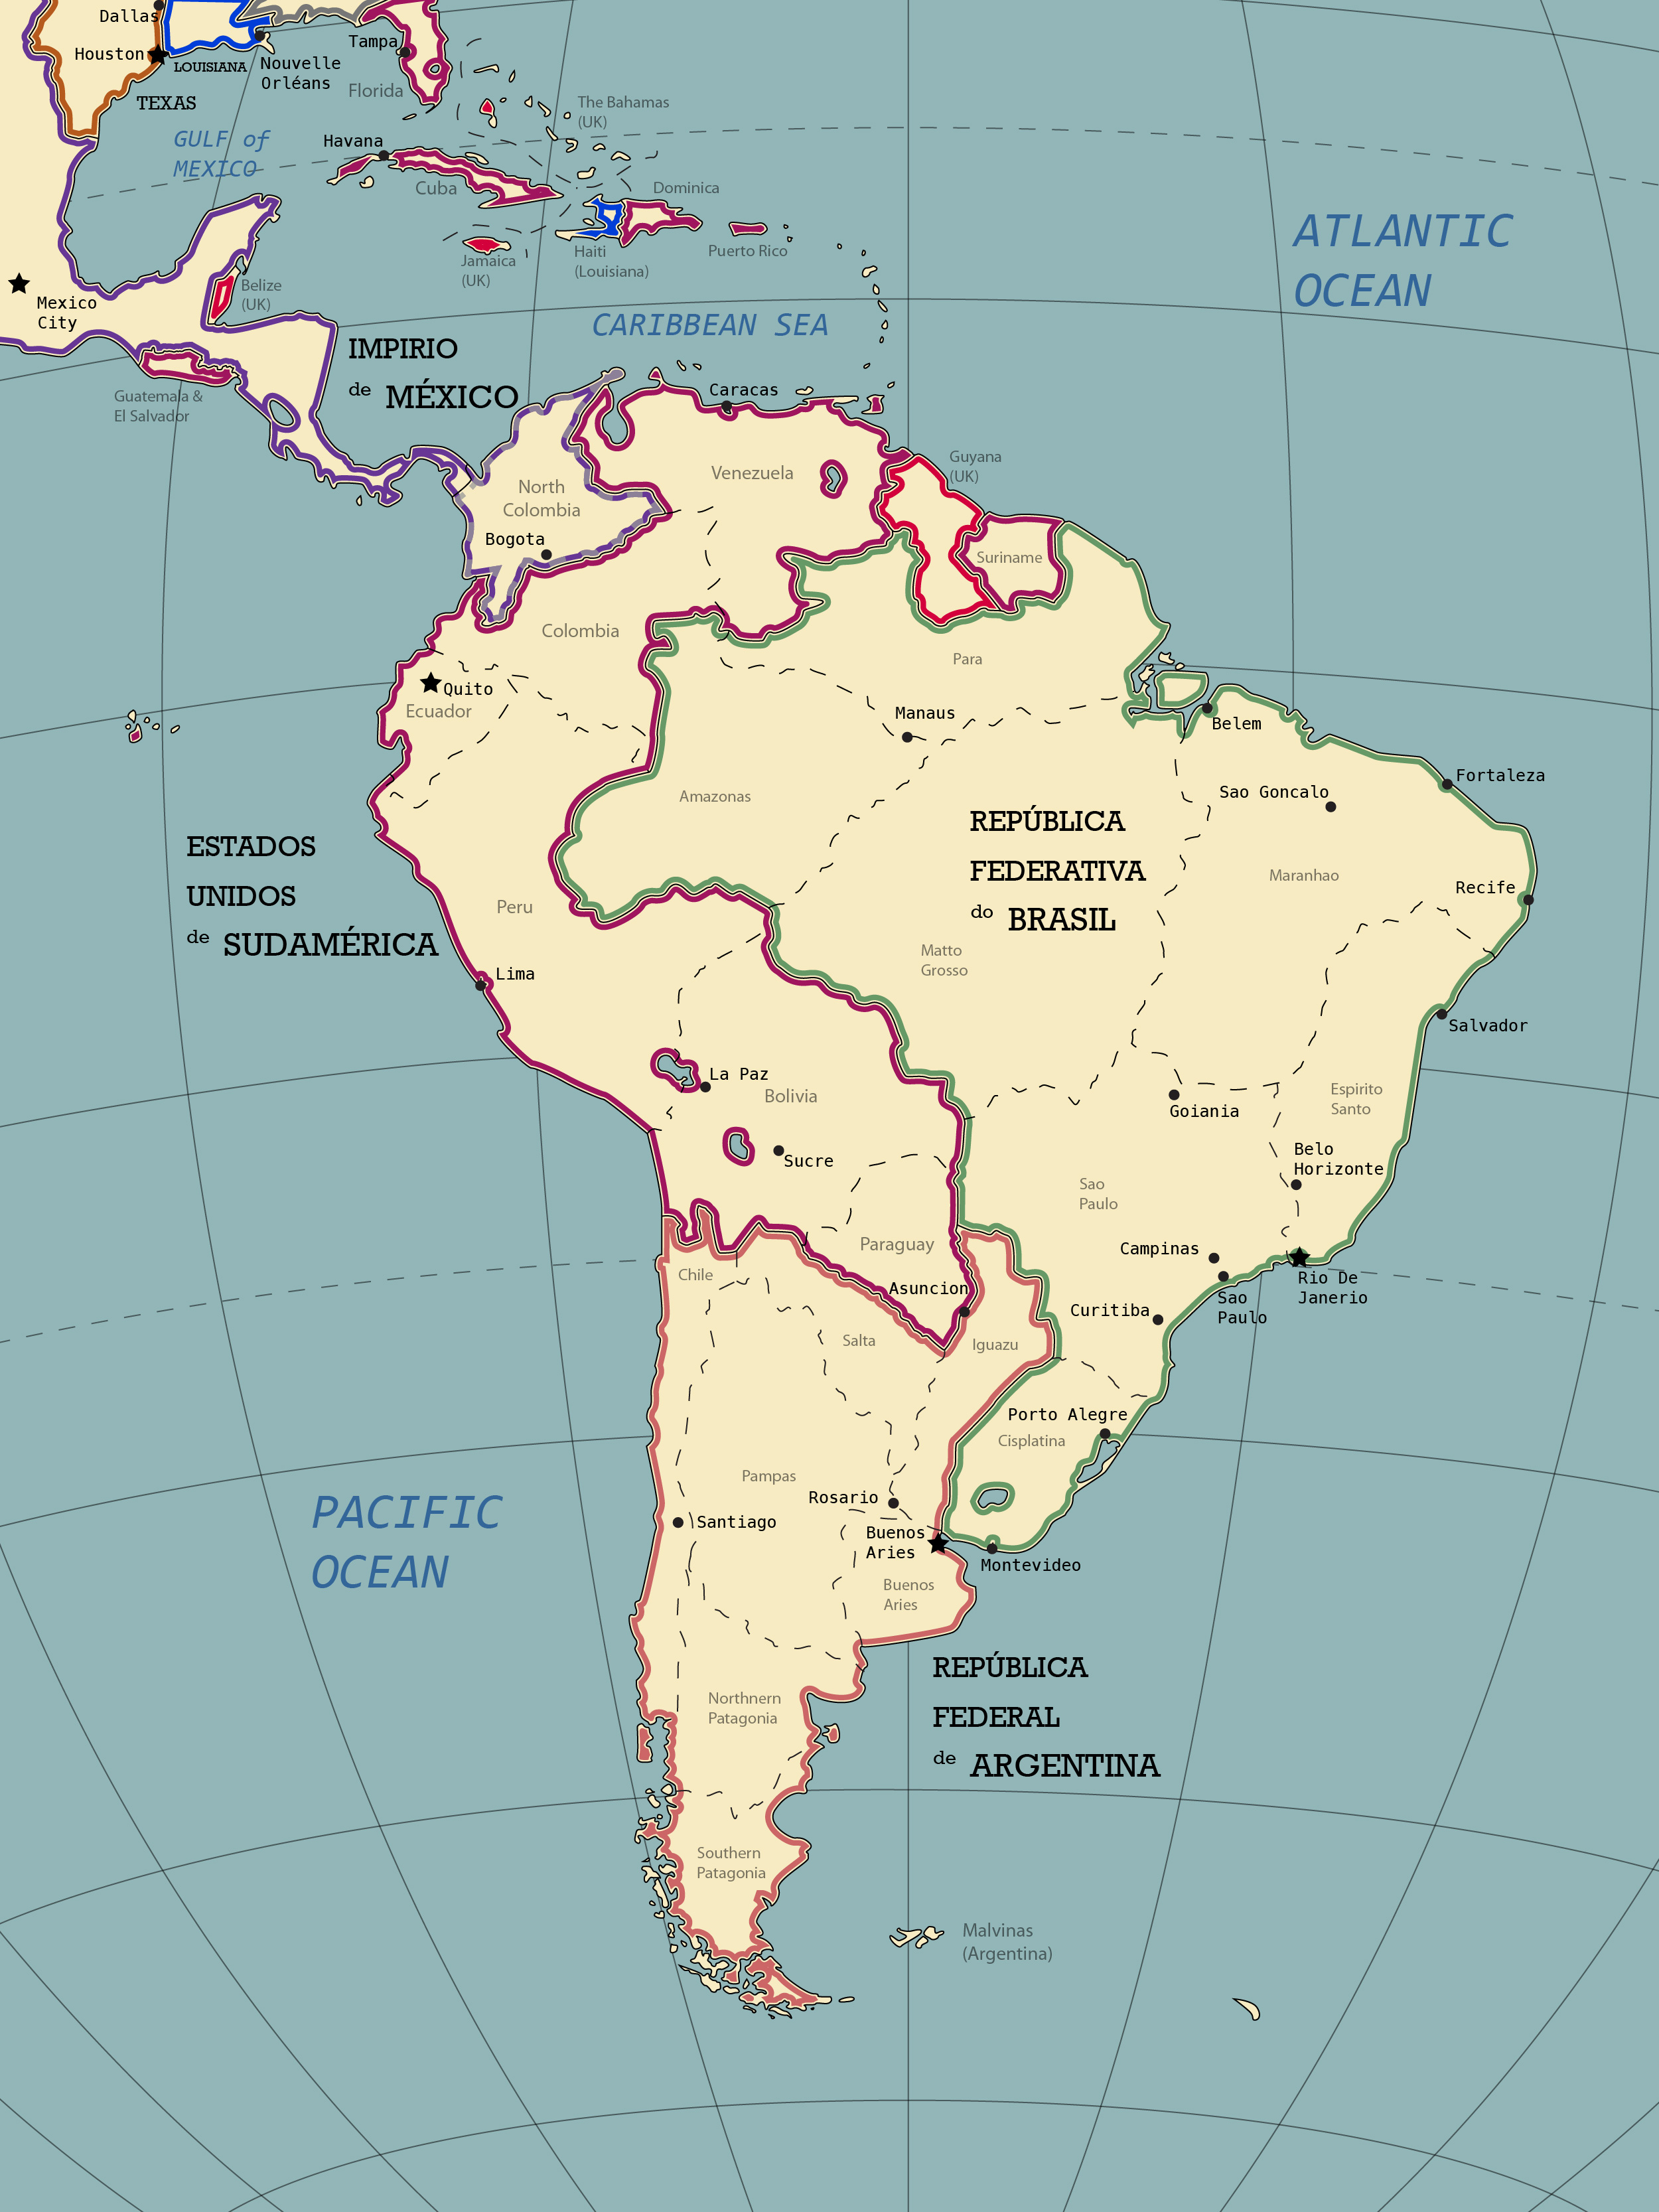 The South American Continent in the Year 1928 by SPARTAN-127